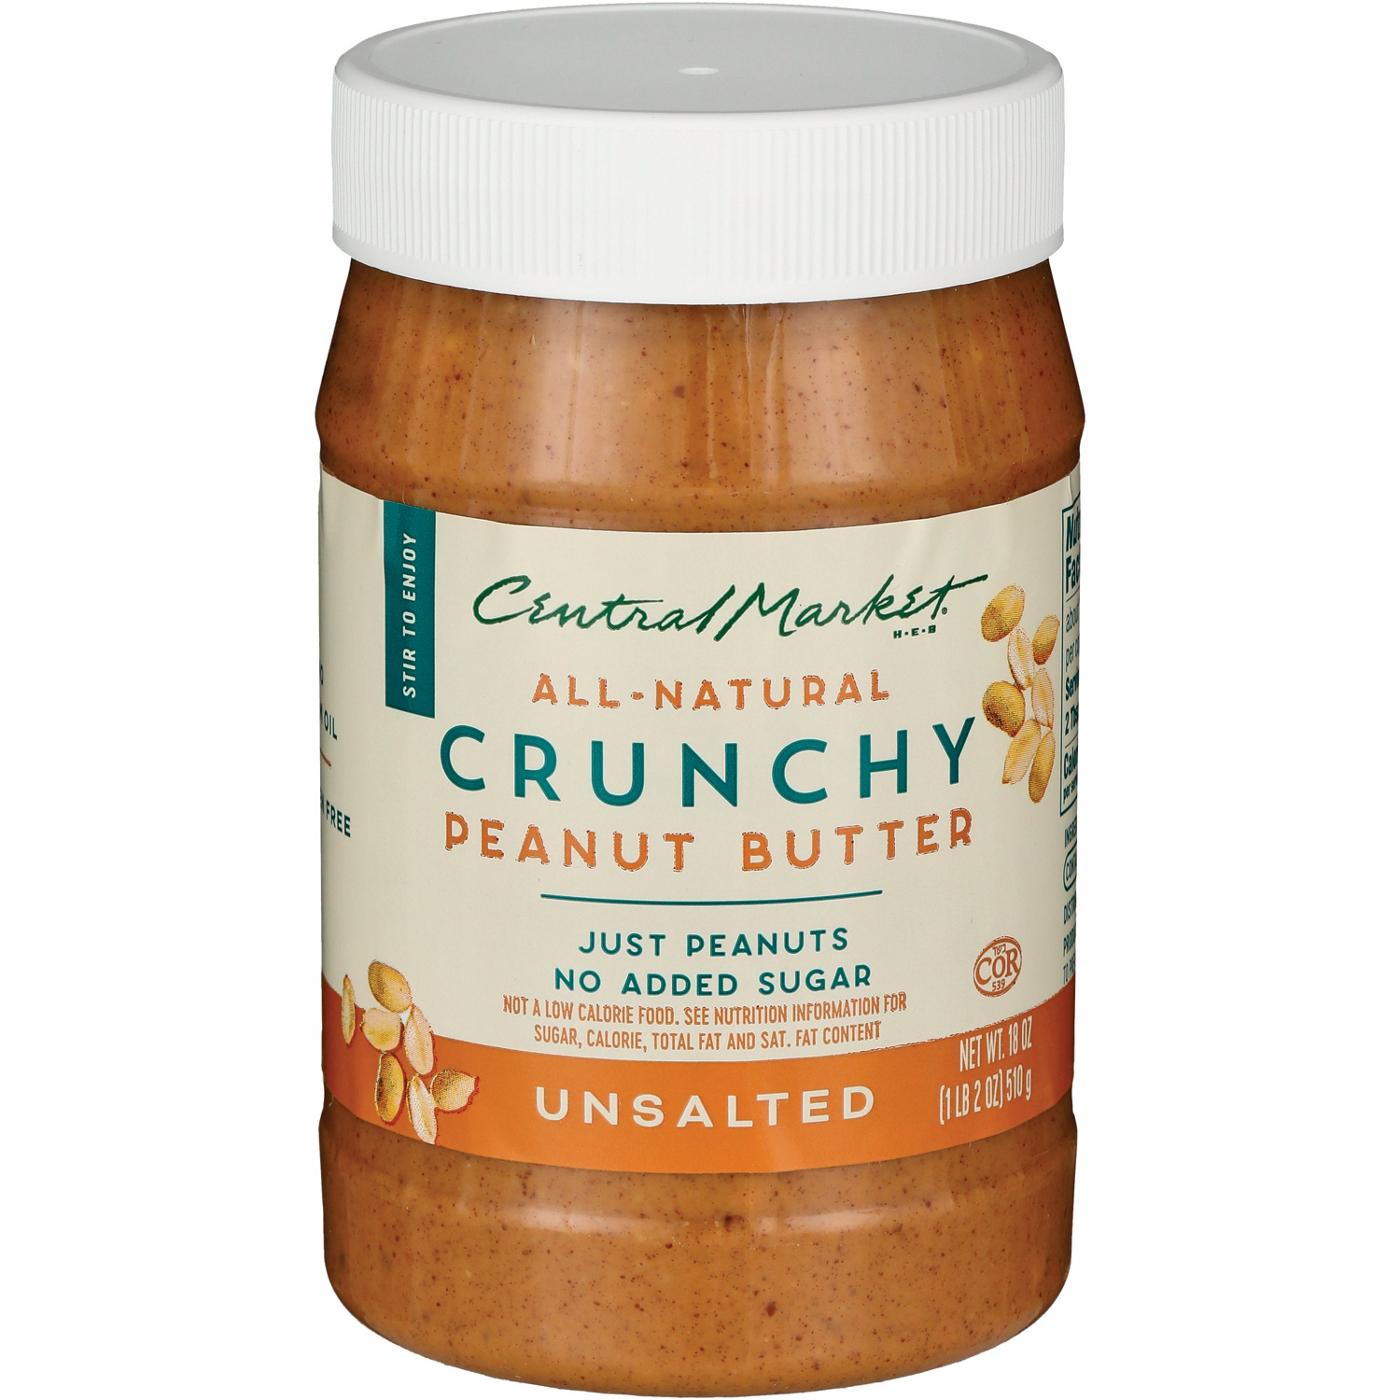 Central Market All-Natural Crunchy Peanut Butter – Unsalted; image 2 of 2